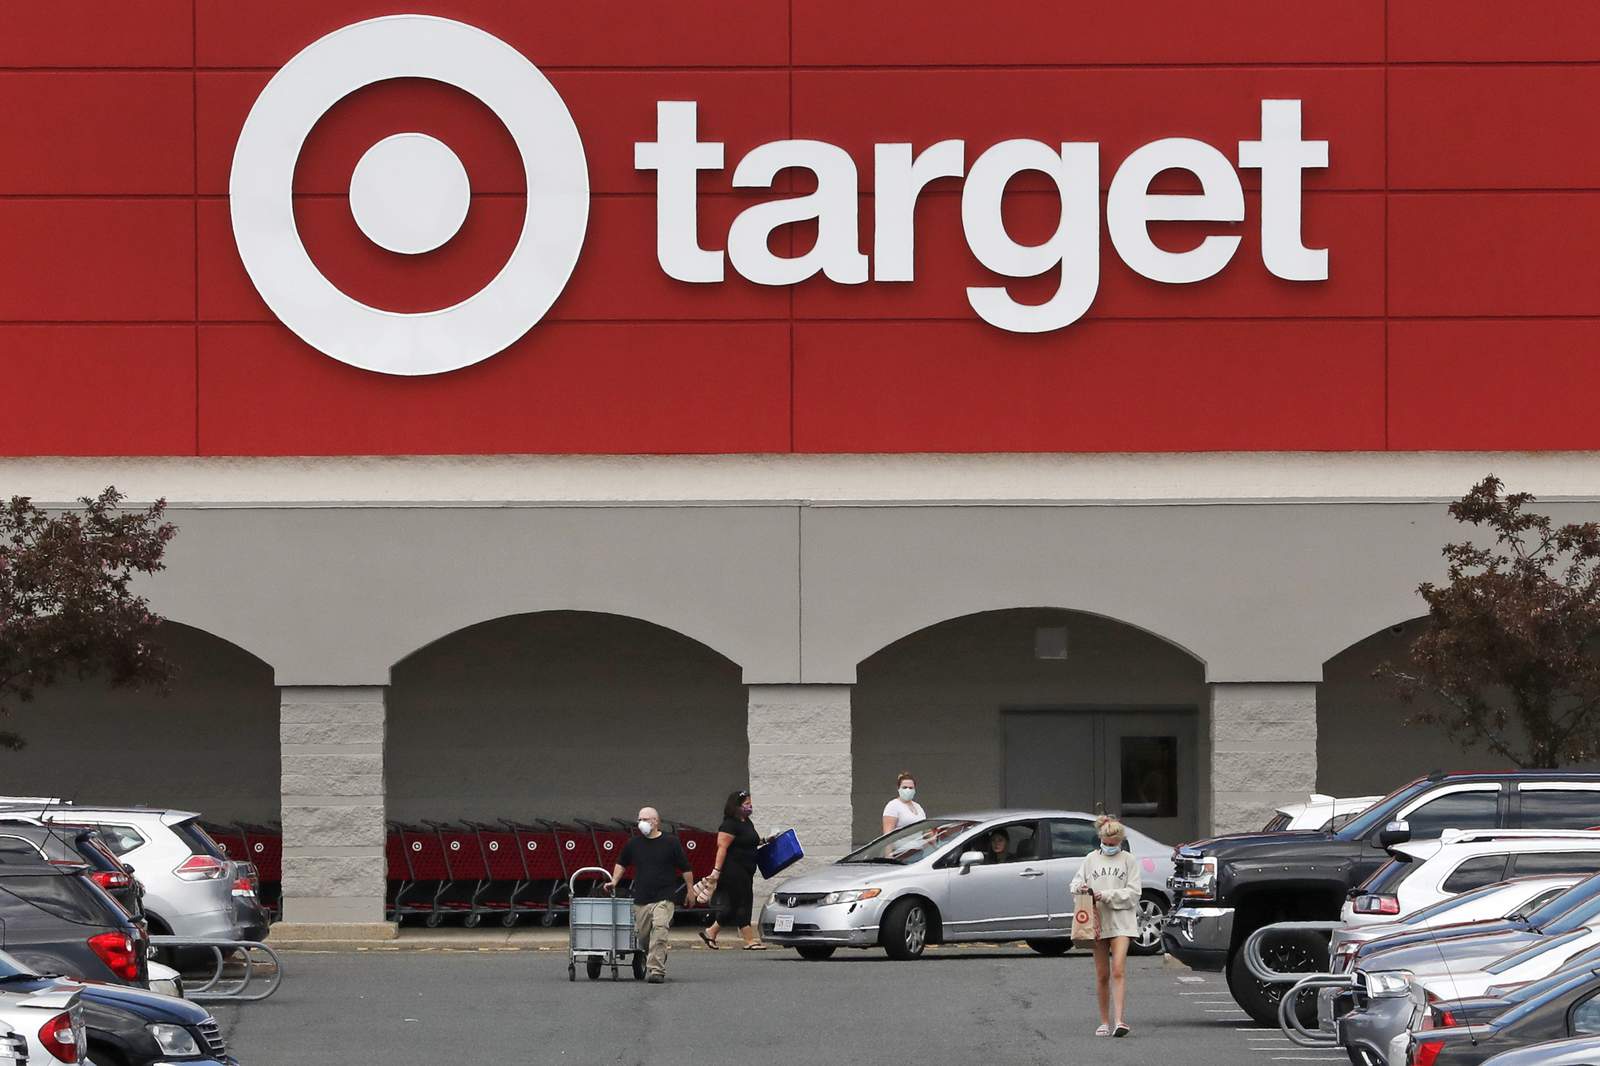 Target makes Juneteenth an official annual company holiday